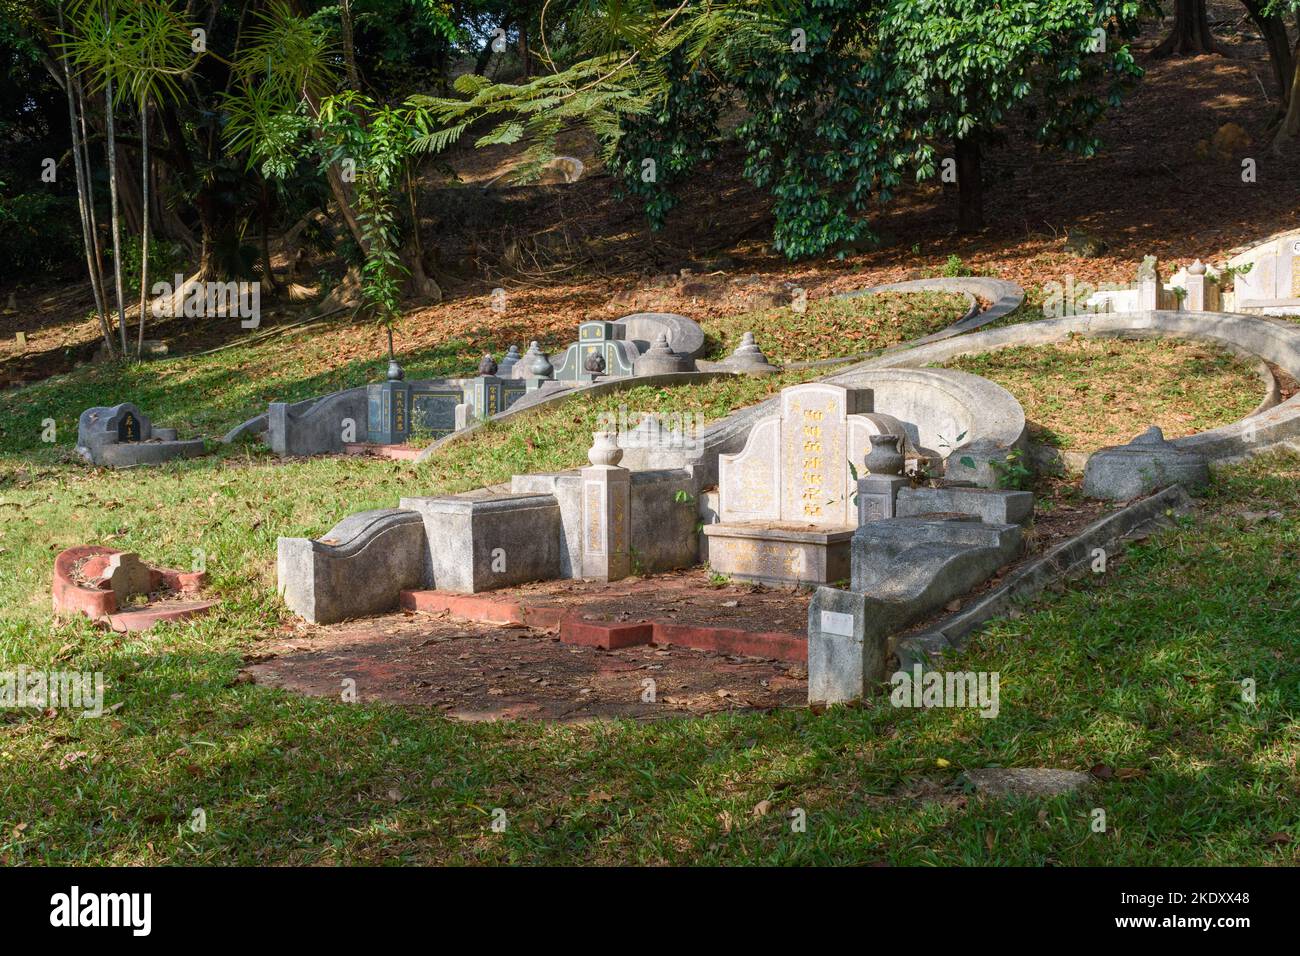 Malacca City, Malaysia - February 28th 2018: A traditional Chinese grave at Bukit China (Chinese Hill), a hillside cemetery with over 12,000 graves. Stock Photo